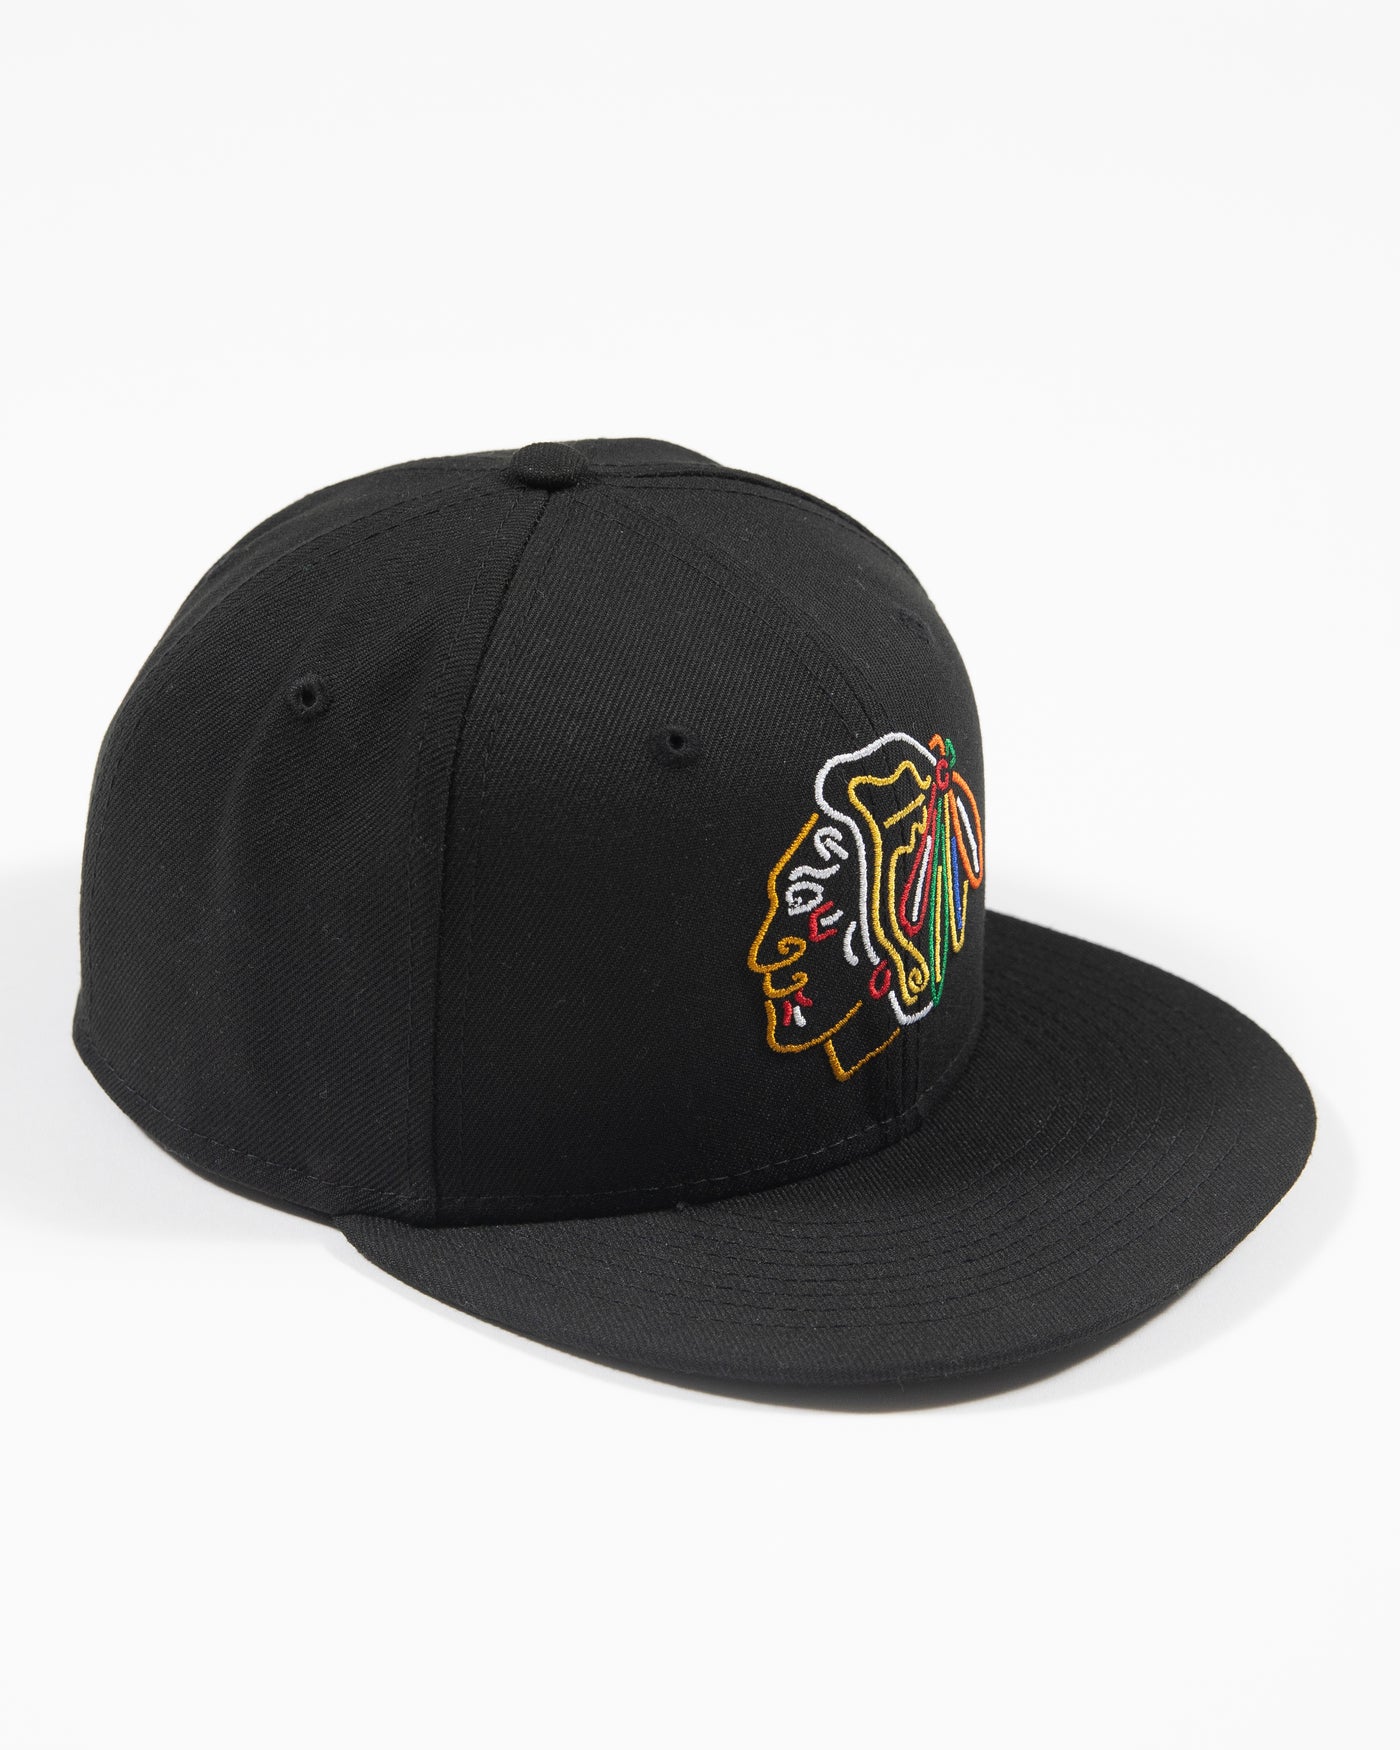 New Era black fitted hat with neon lights inspired primary logo - angled right side view